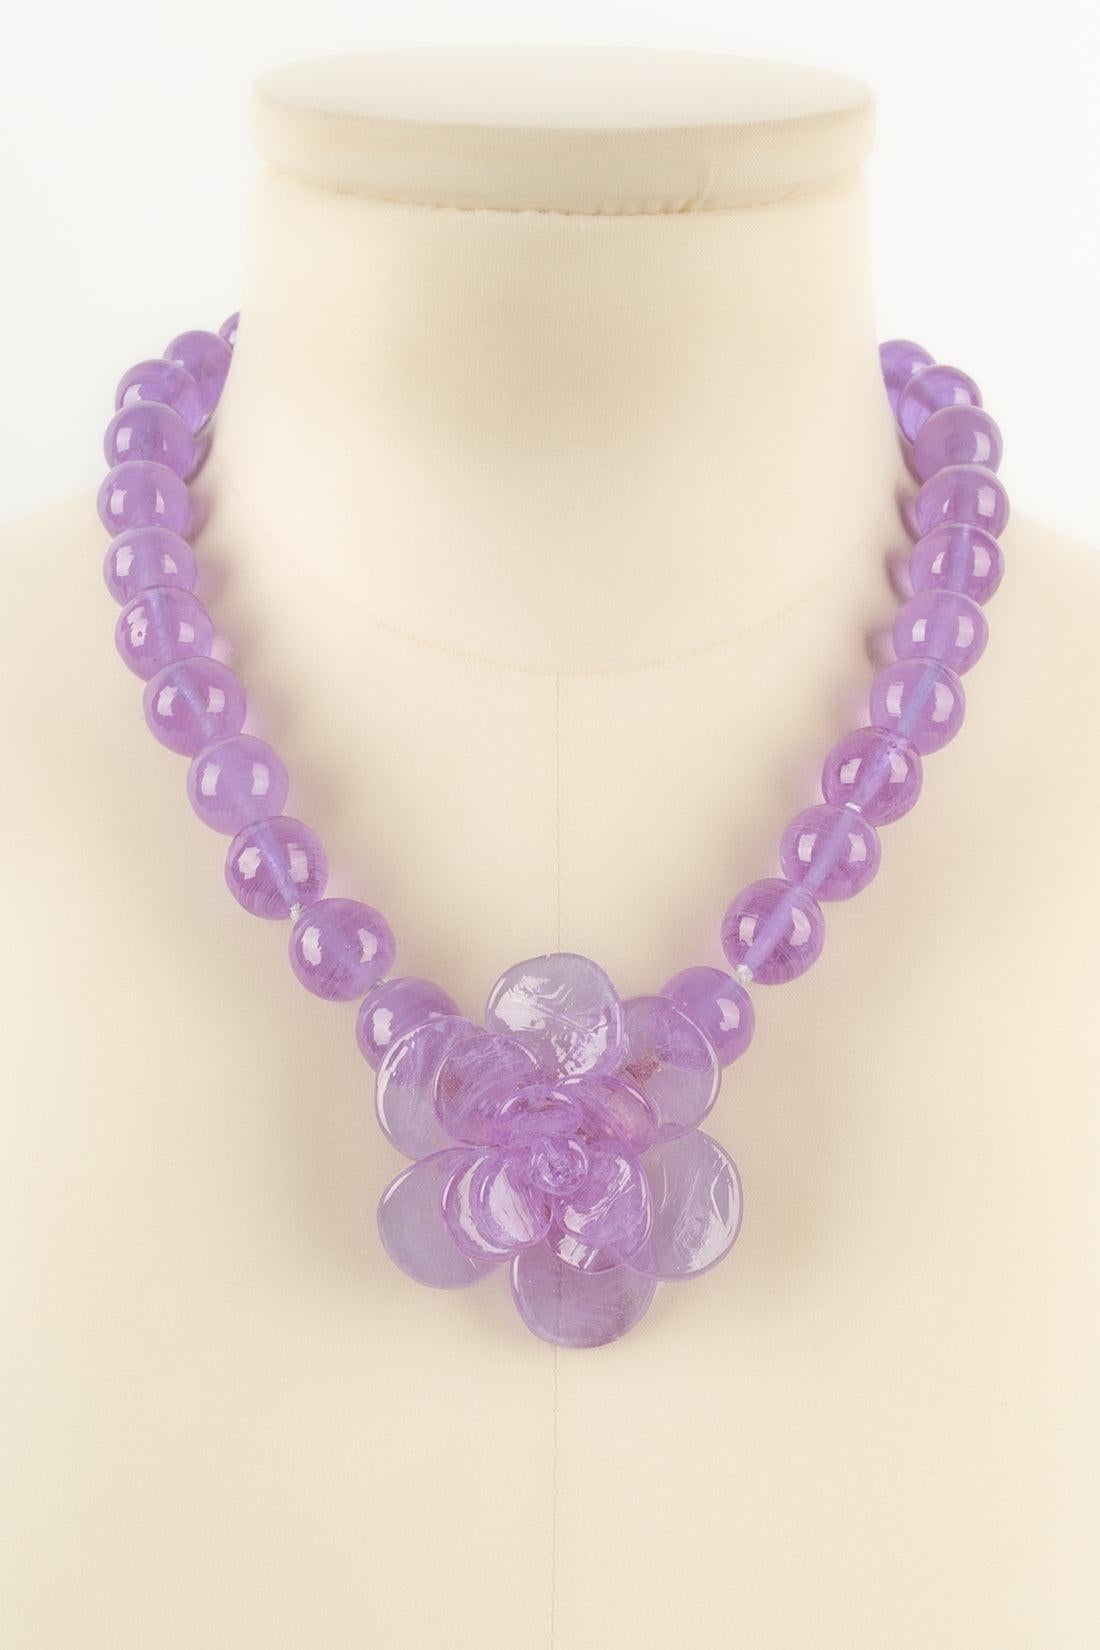 Augustine - (Made in France) Camellia necklace in purple glass paste.

Additional information:
Condition: Very good condition
Dimensions: Length: from 44 cm to 49 cm

Seller Reference: BC35